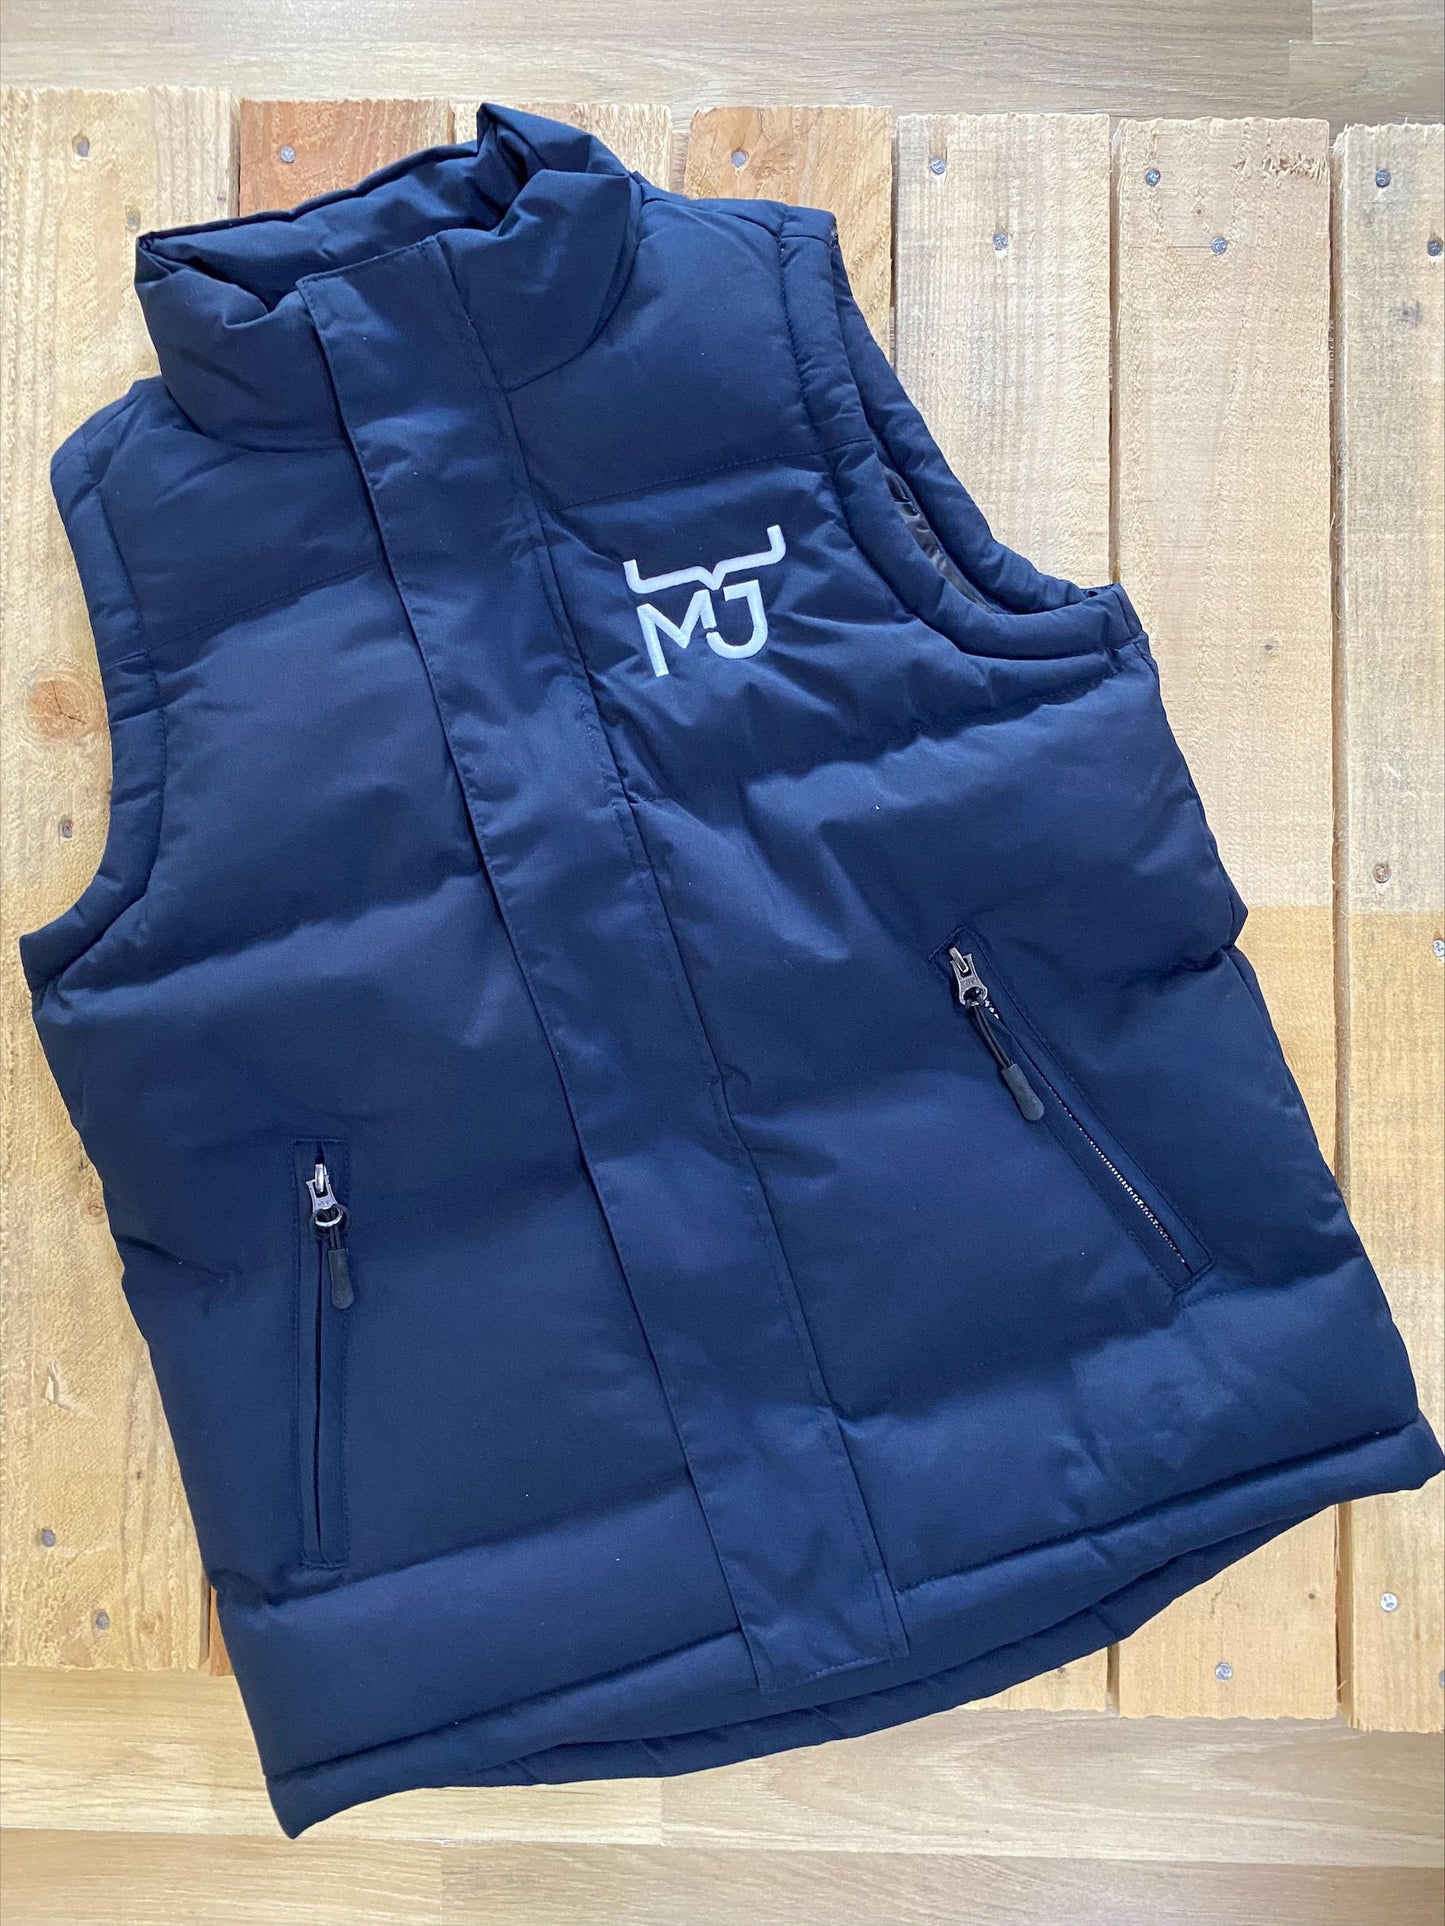 Junction Puffer Vest • MJ Clothing Womens Mens Country Clothing Kids Fashion